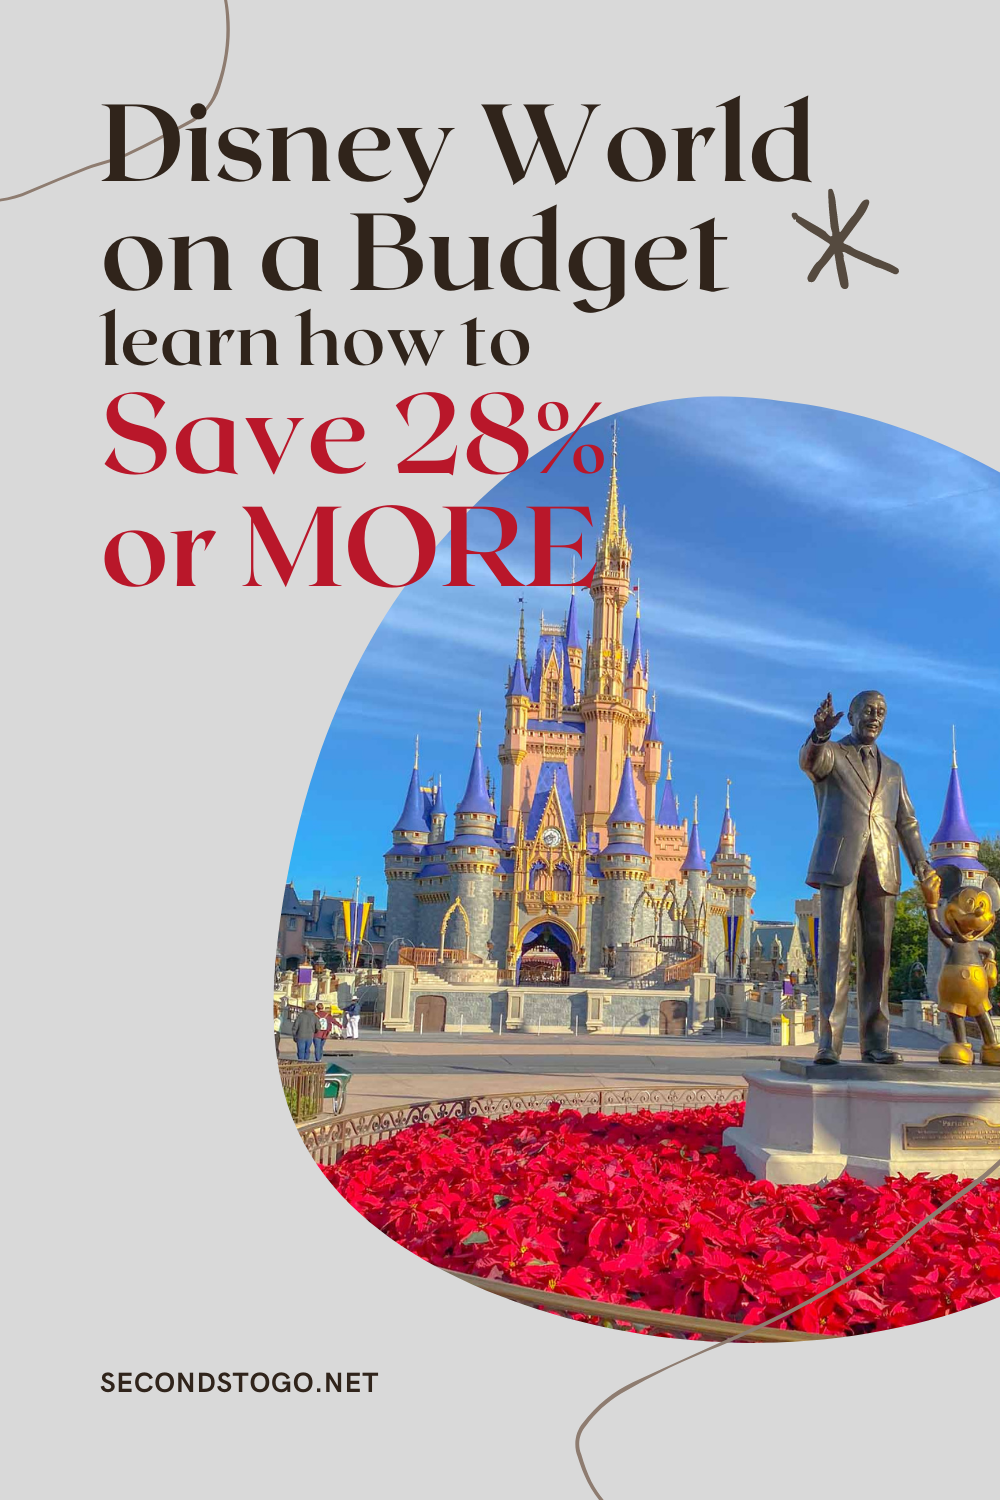 Disney World on a Budget learn how to Save 28 or MORE